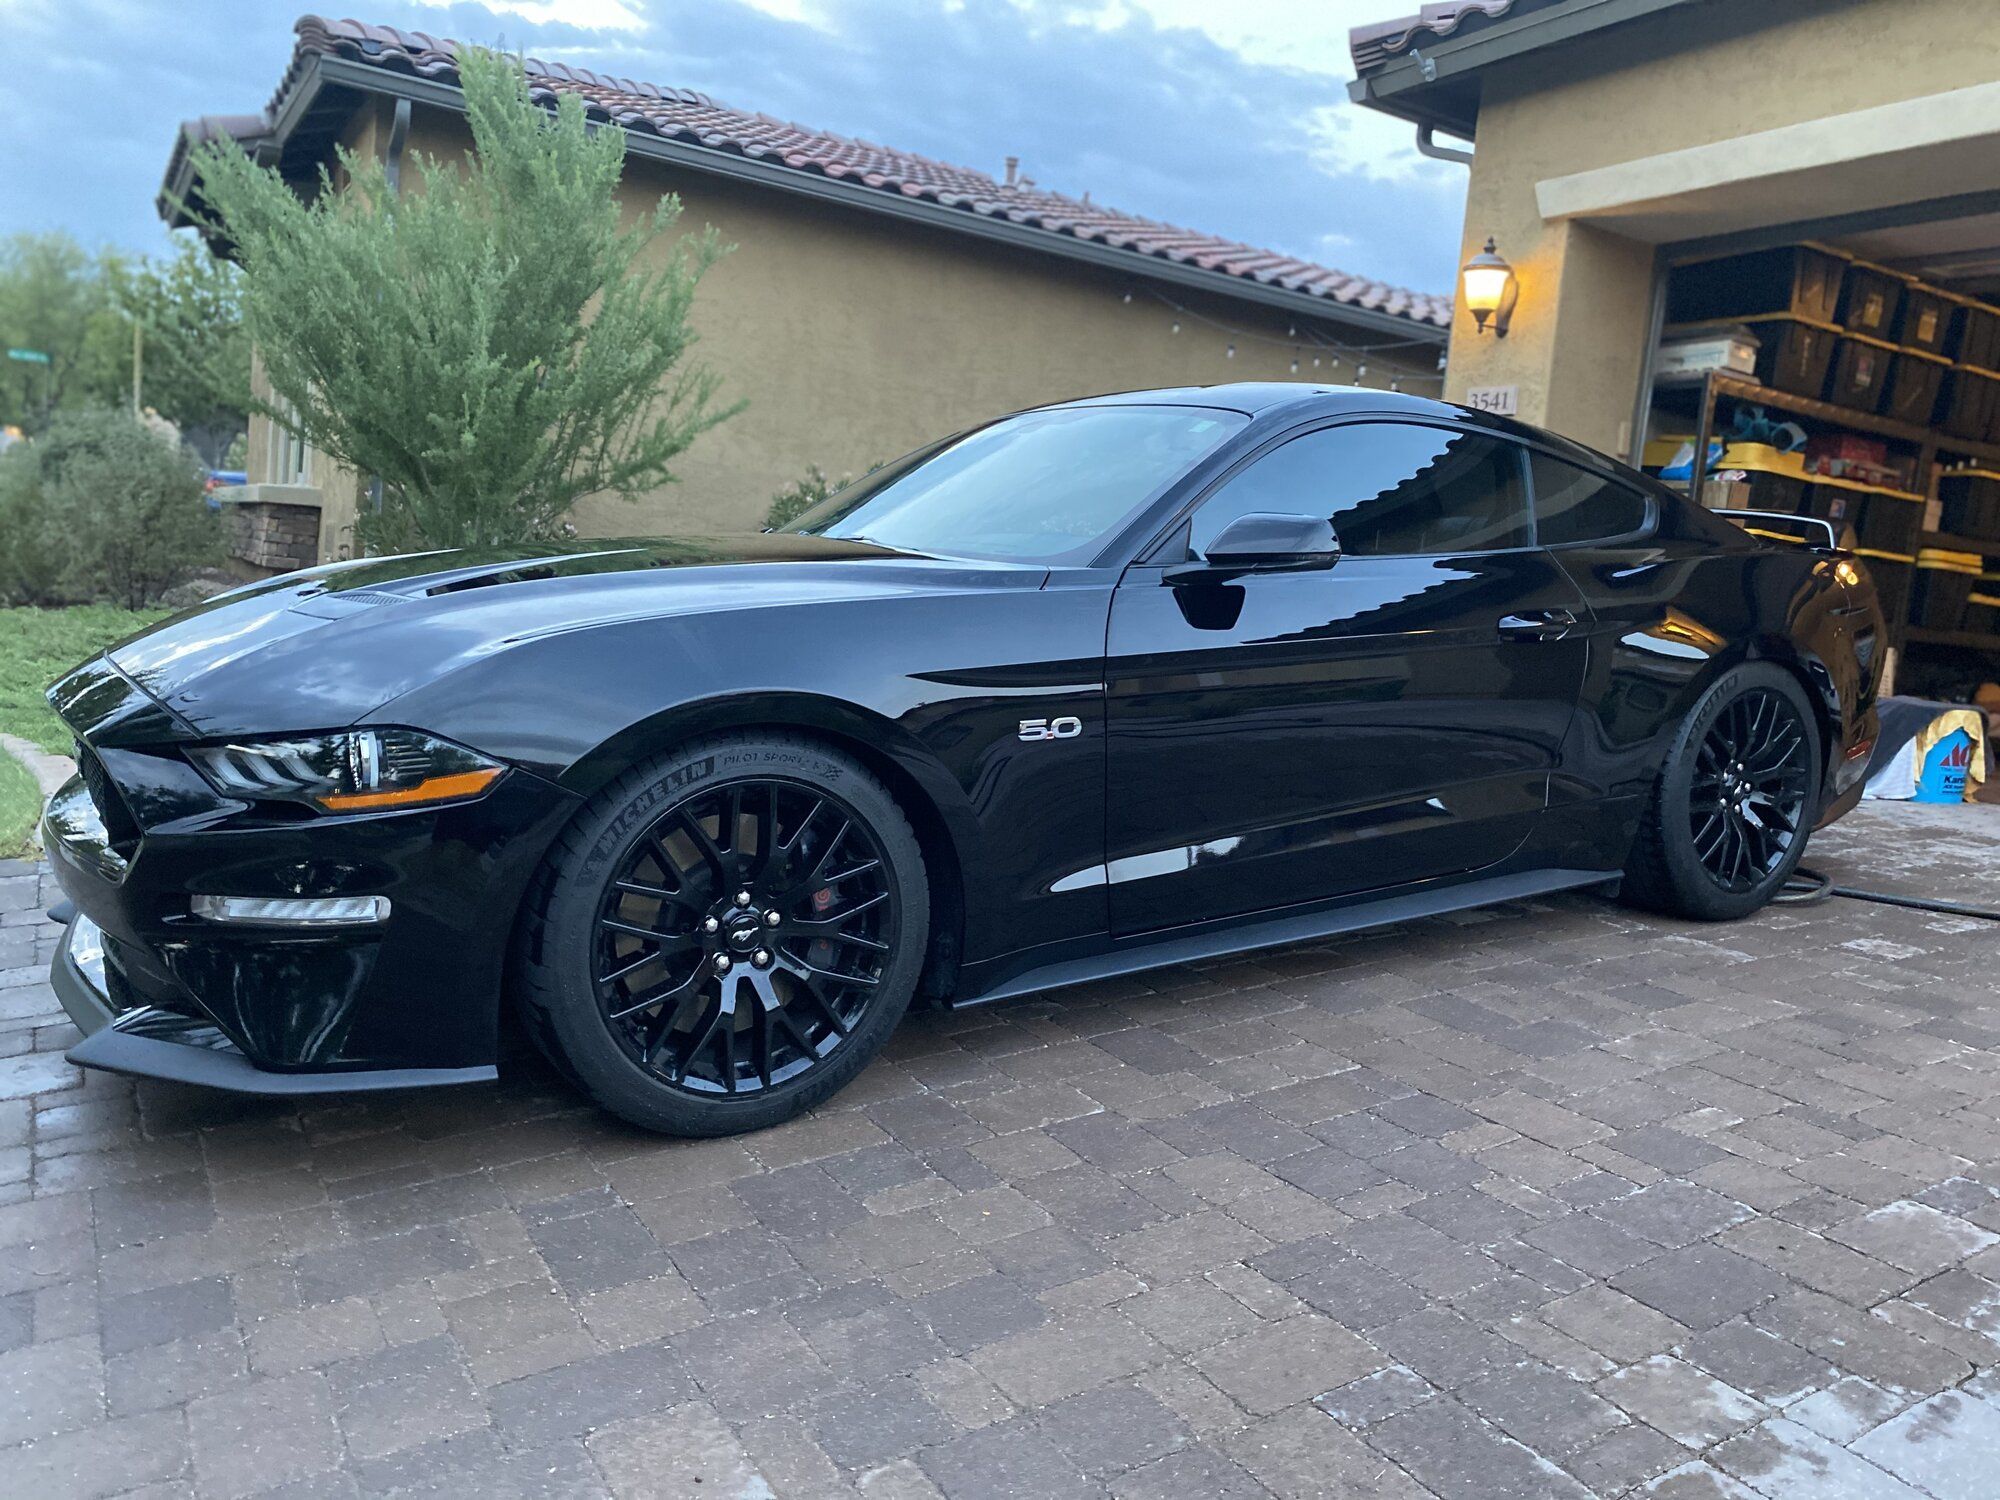 2019 Mustang
GT HPDE/Track -  (BluPil 2019 GT)